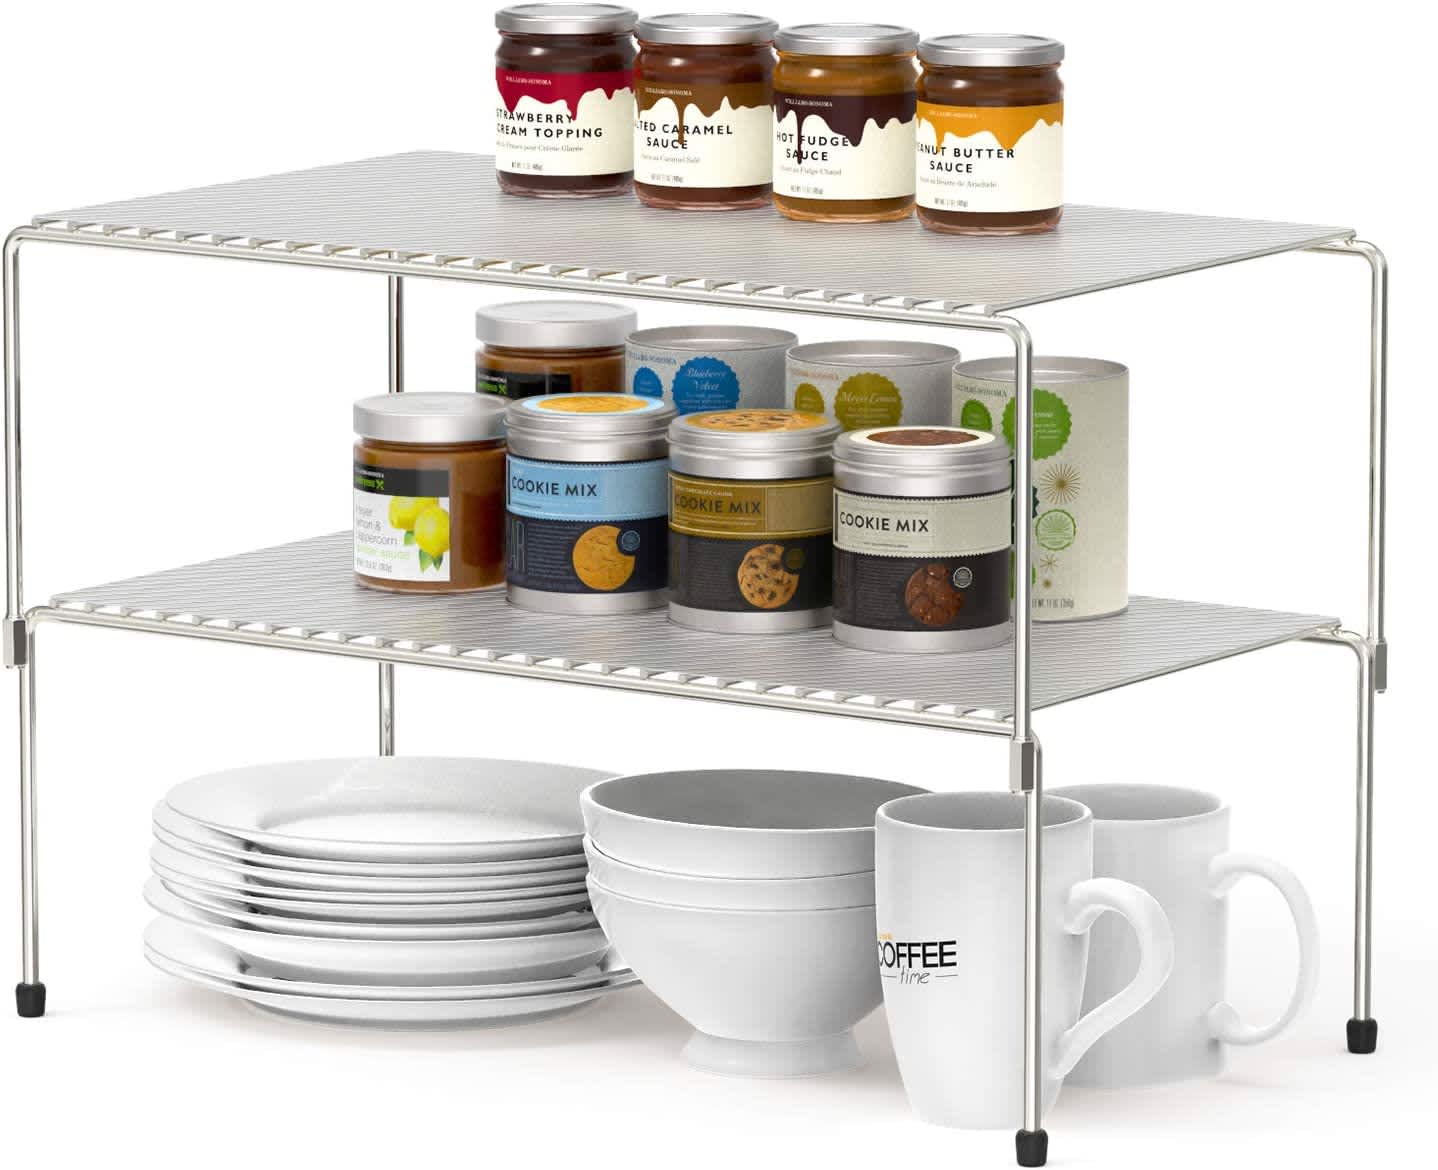 5 Best Can Organizers of 2022 for Soup & Soda (Maximized Space)